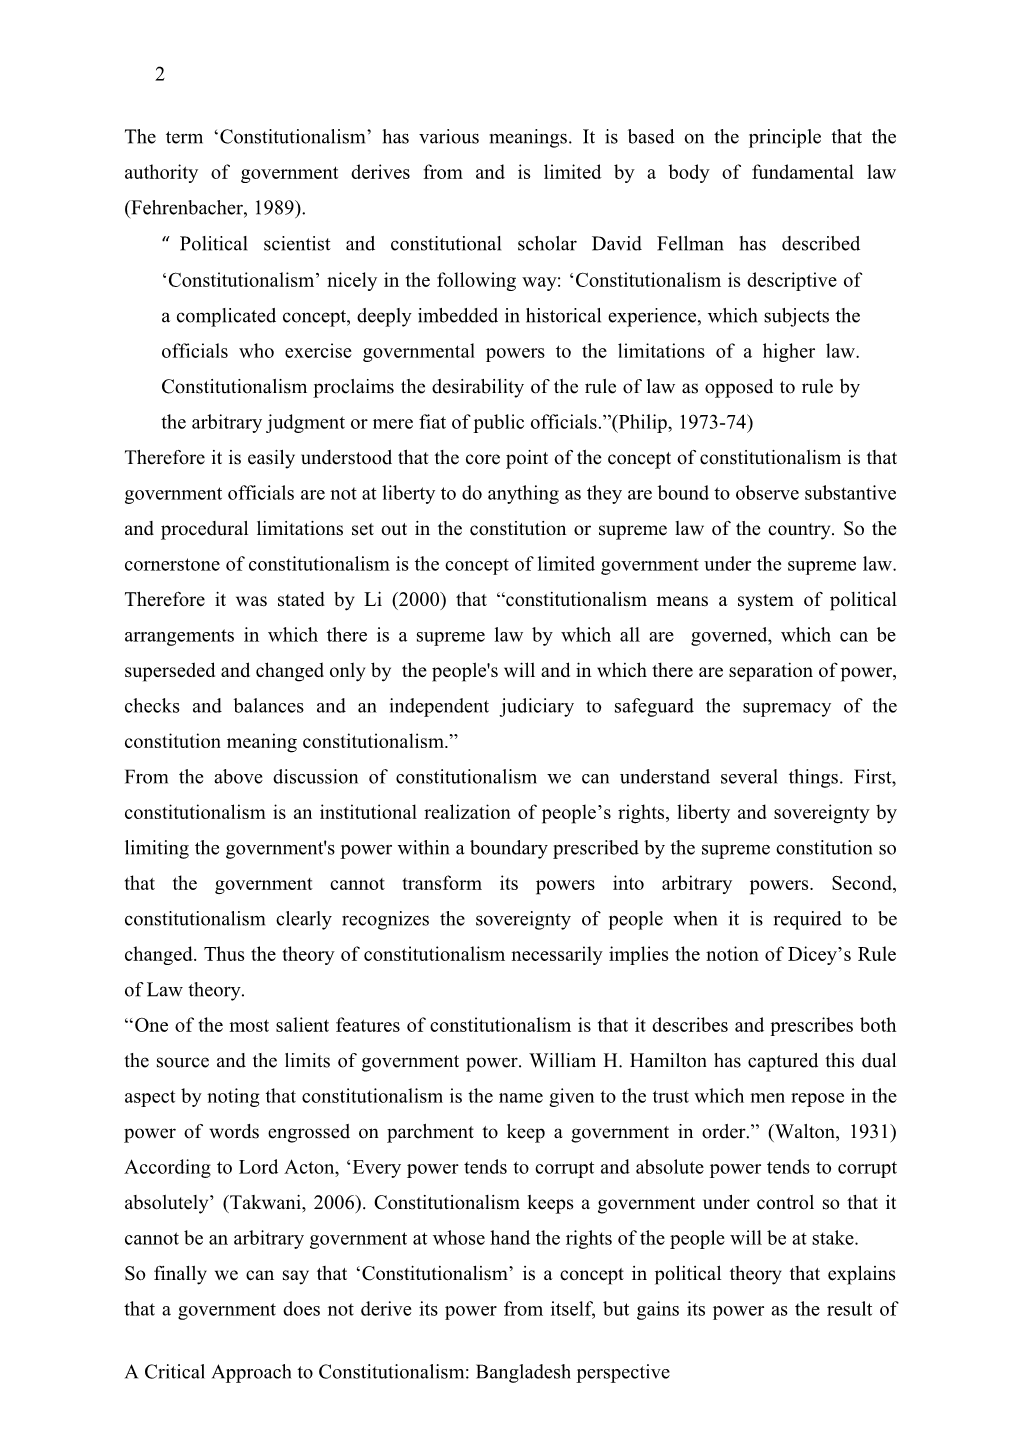 A Critical Approach to Constitutionalism: Bangladesh Perspective